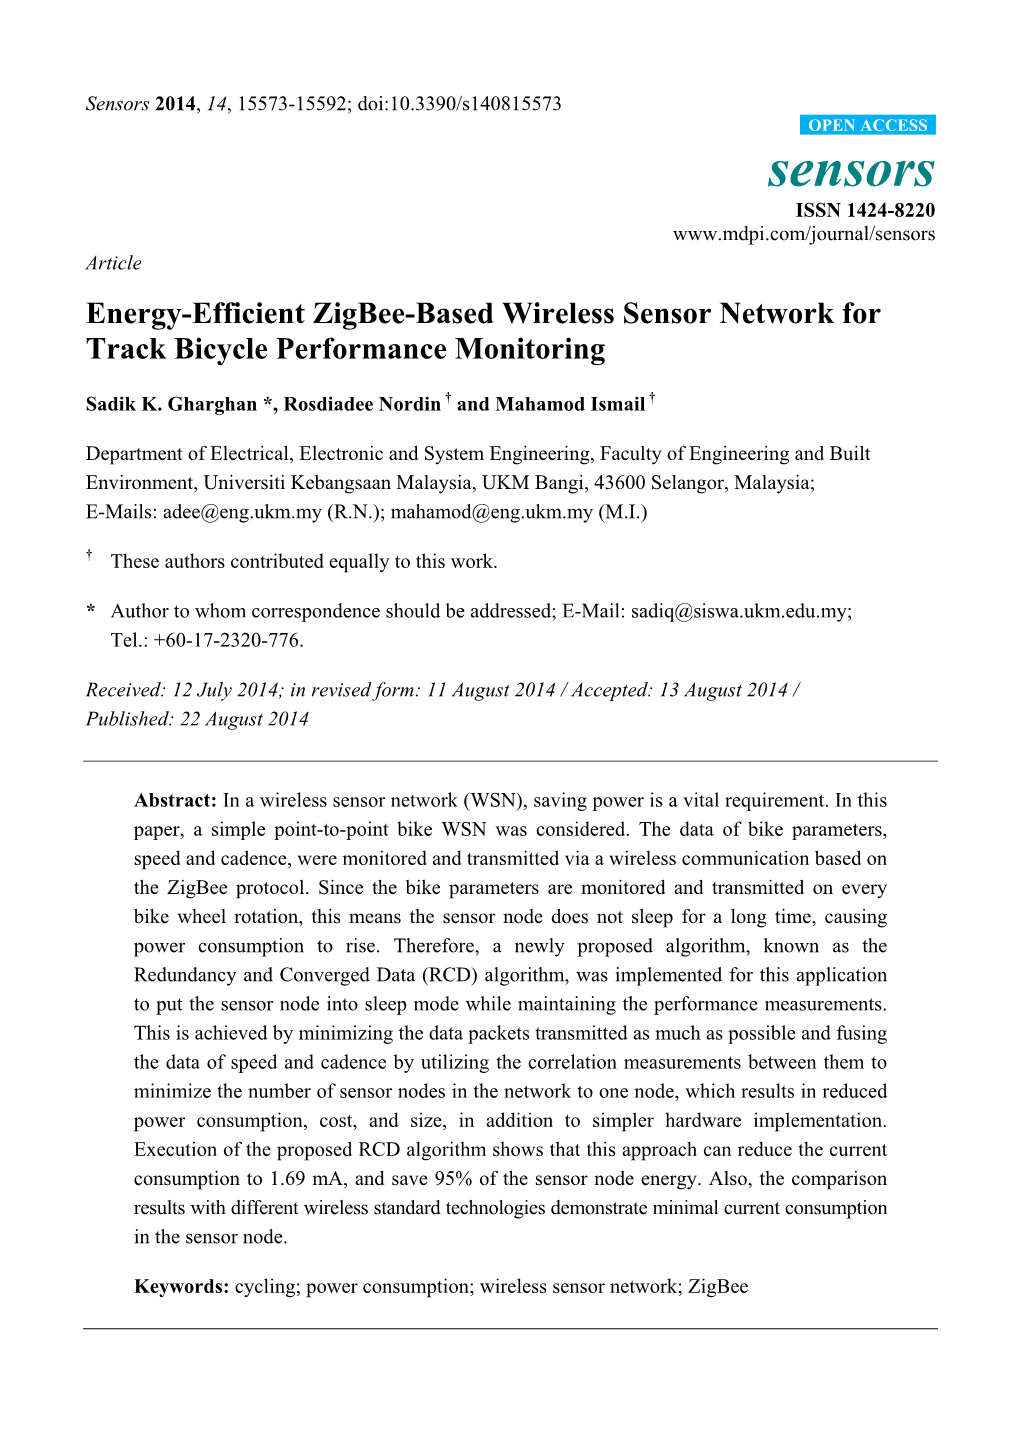 Energy-Efficient Zigbee-Based Wireless Sensor Network for Track Bicycle Performance Monitoring